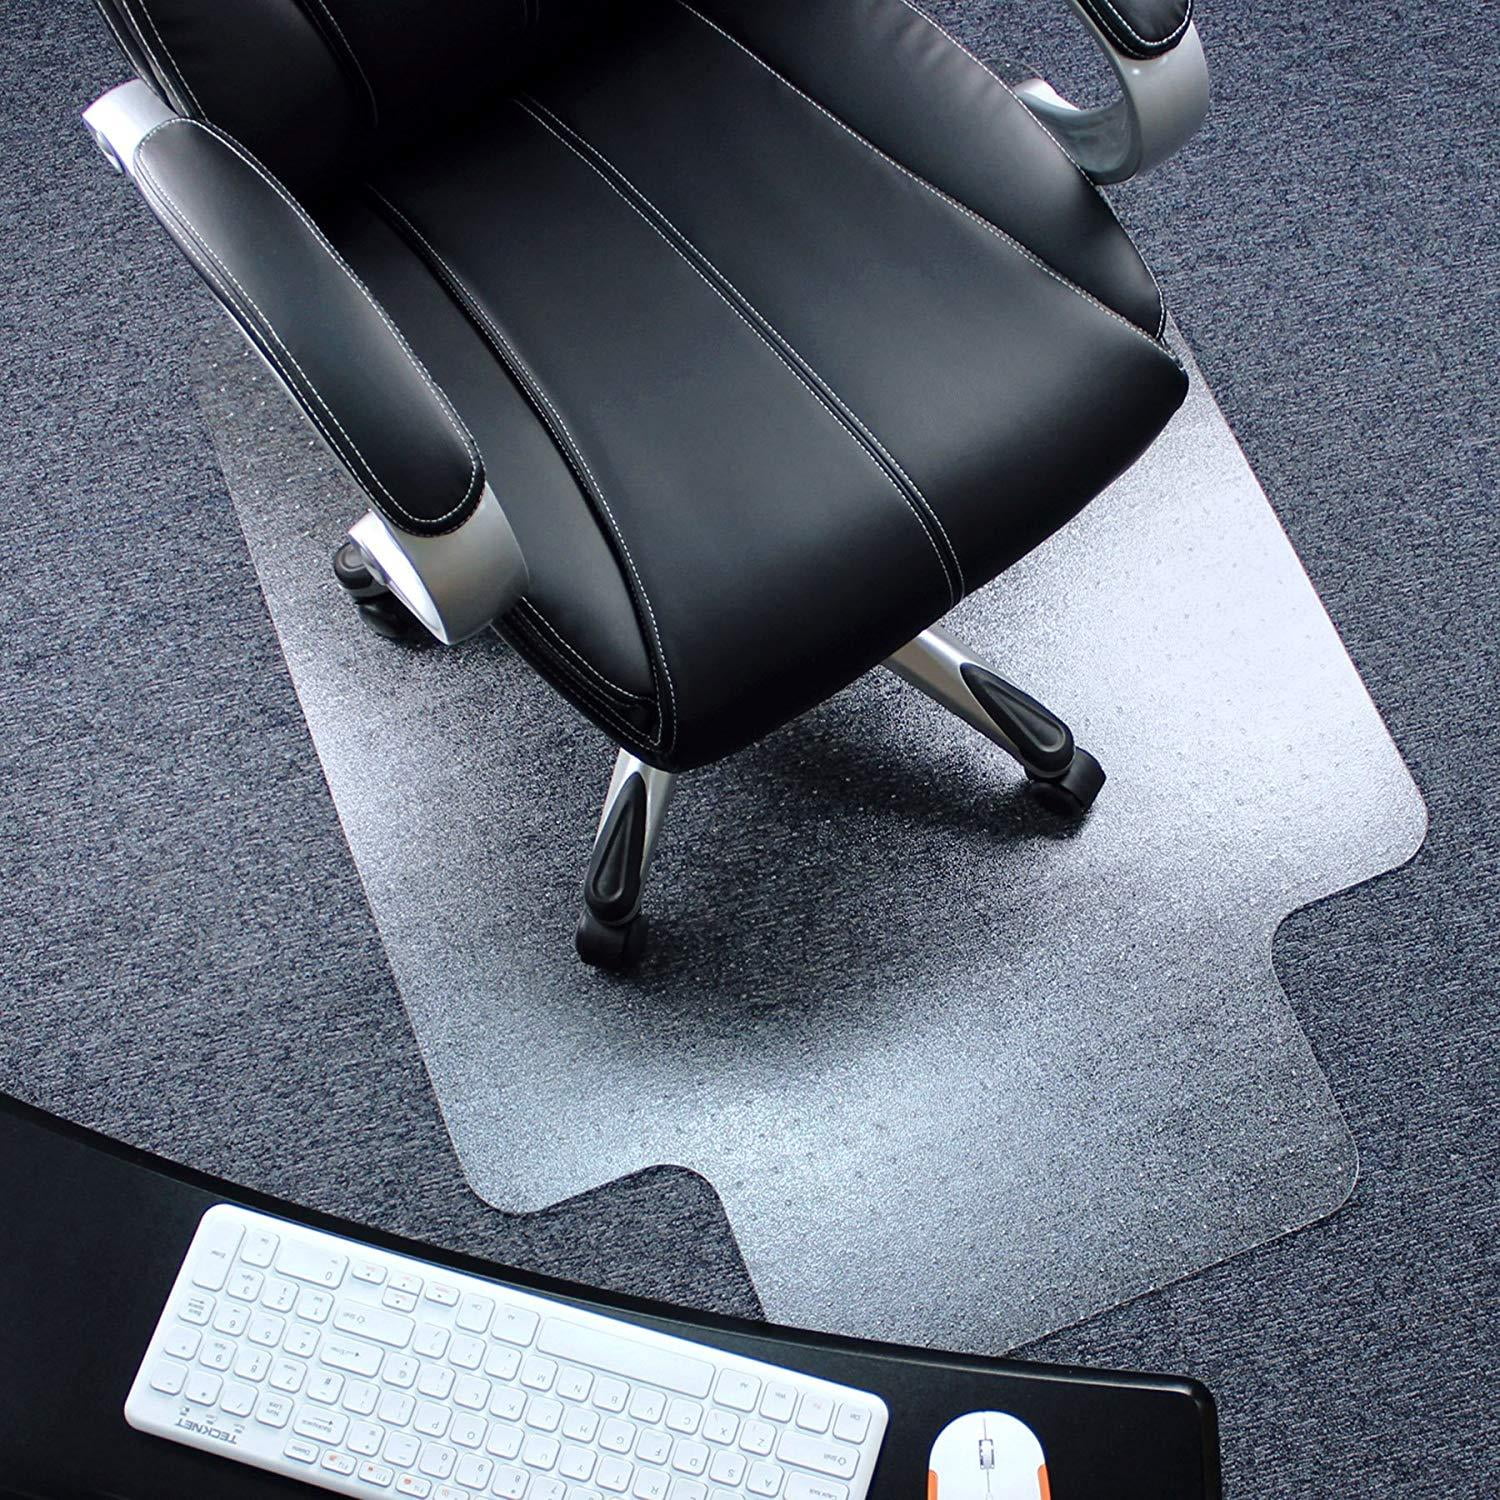 Home Office PVC Chair Mat for Carpet Floor Protection Under Computer Desk Chair 